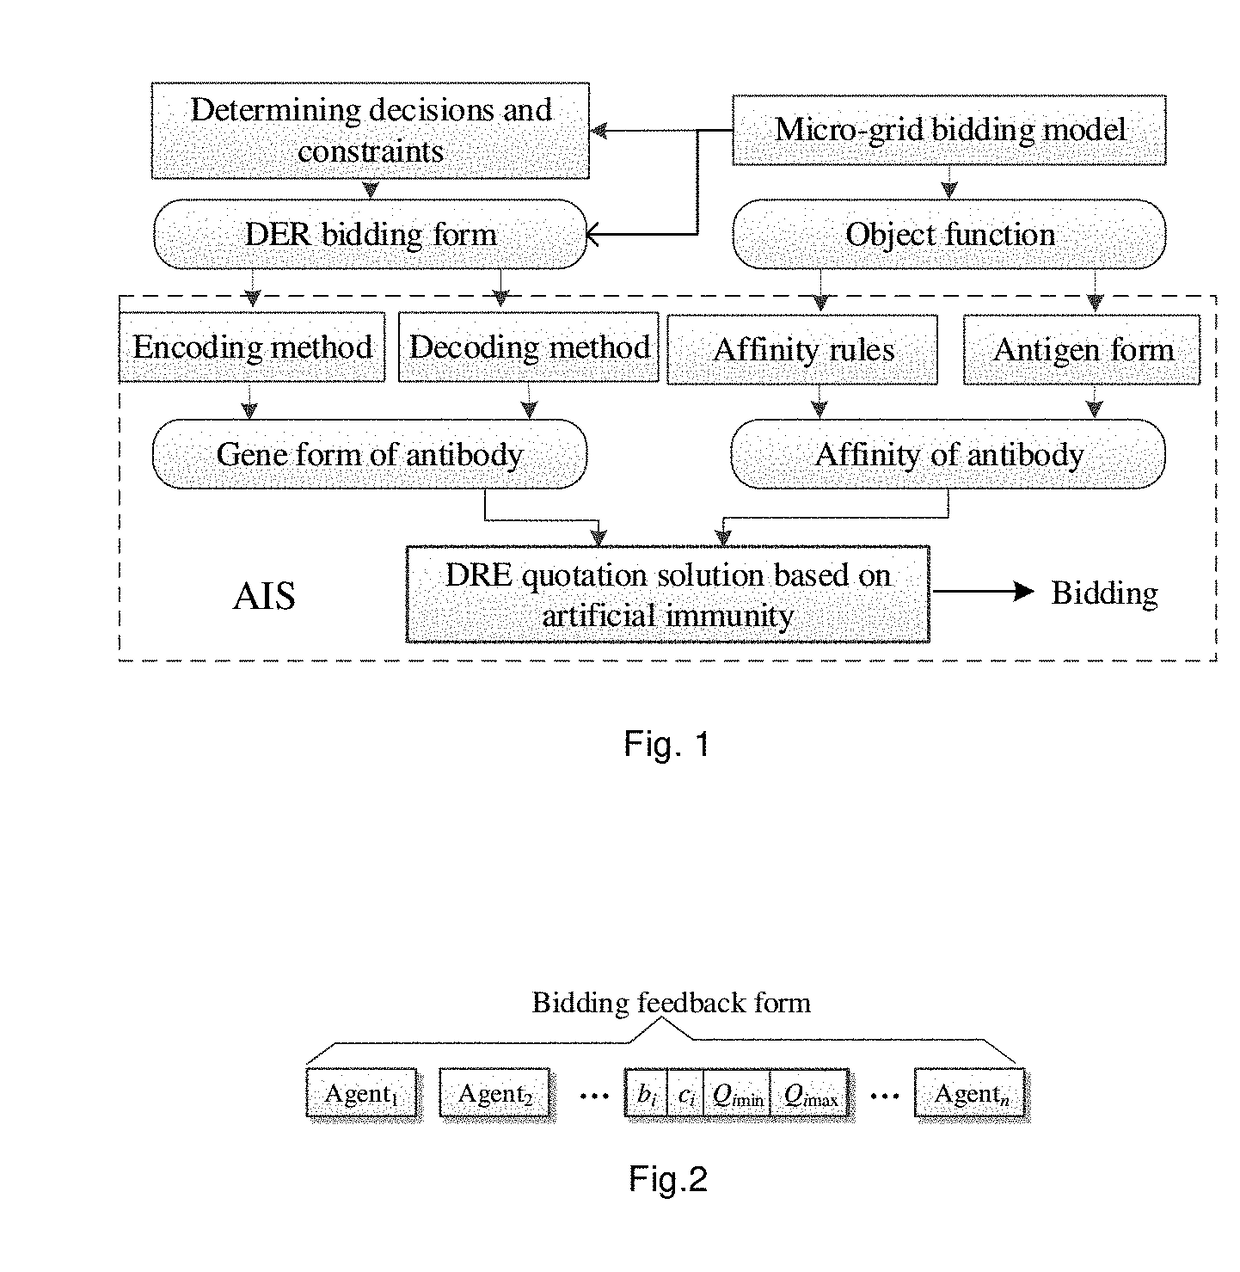 Bidding method of distributed energy resource in micro-grid based on artificial immunity